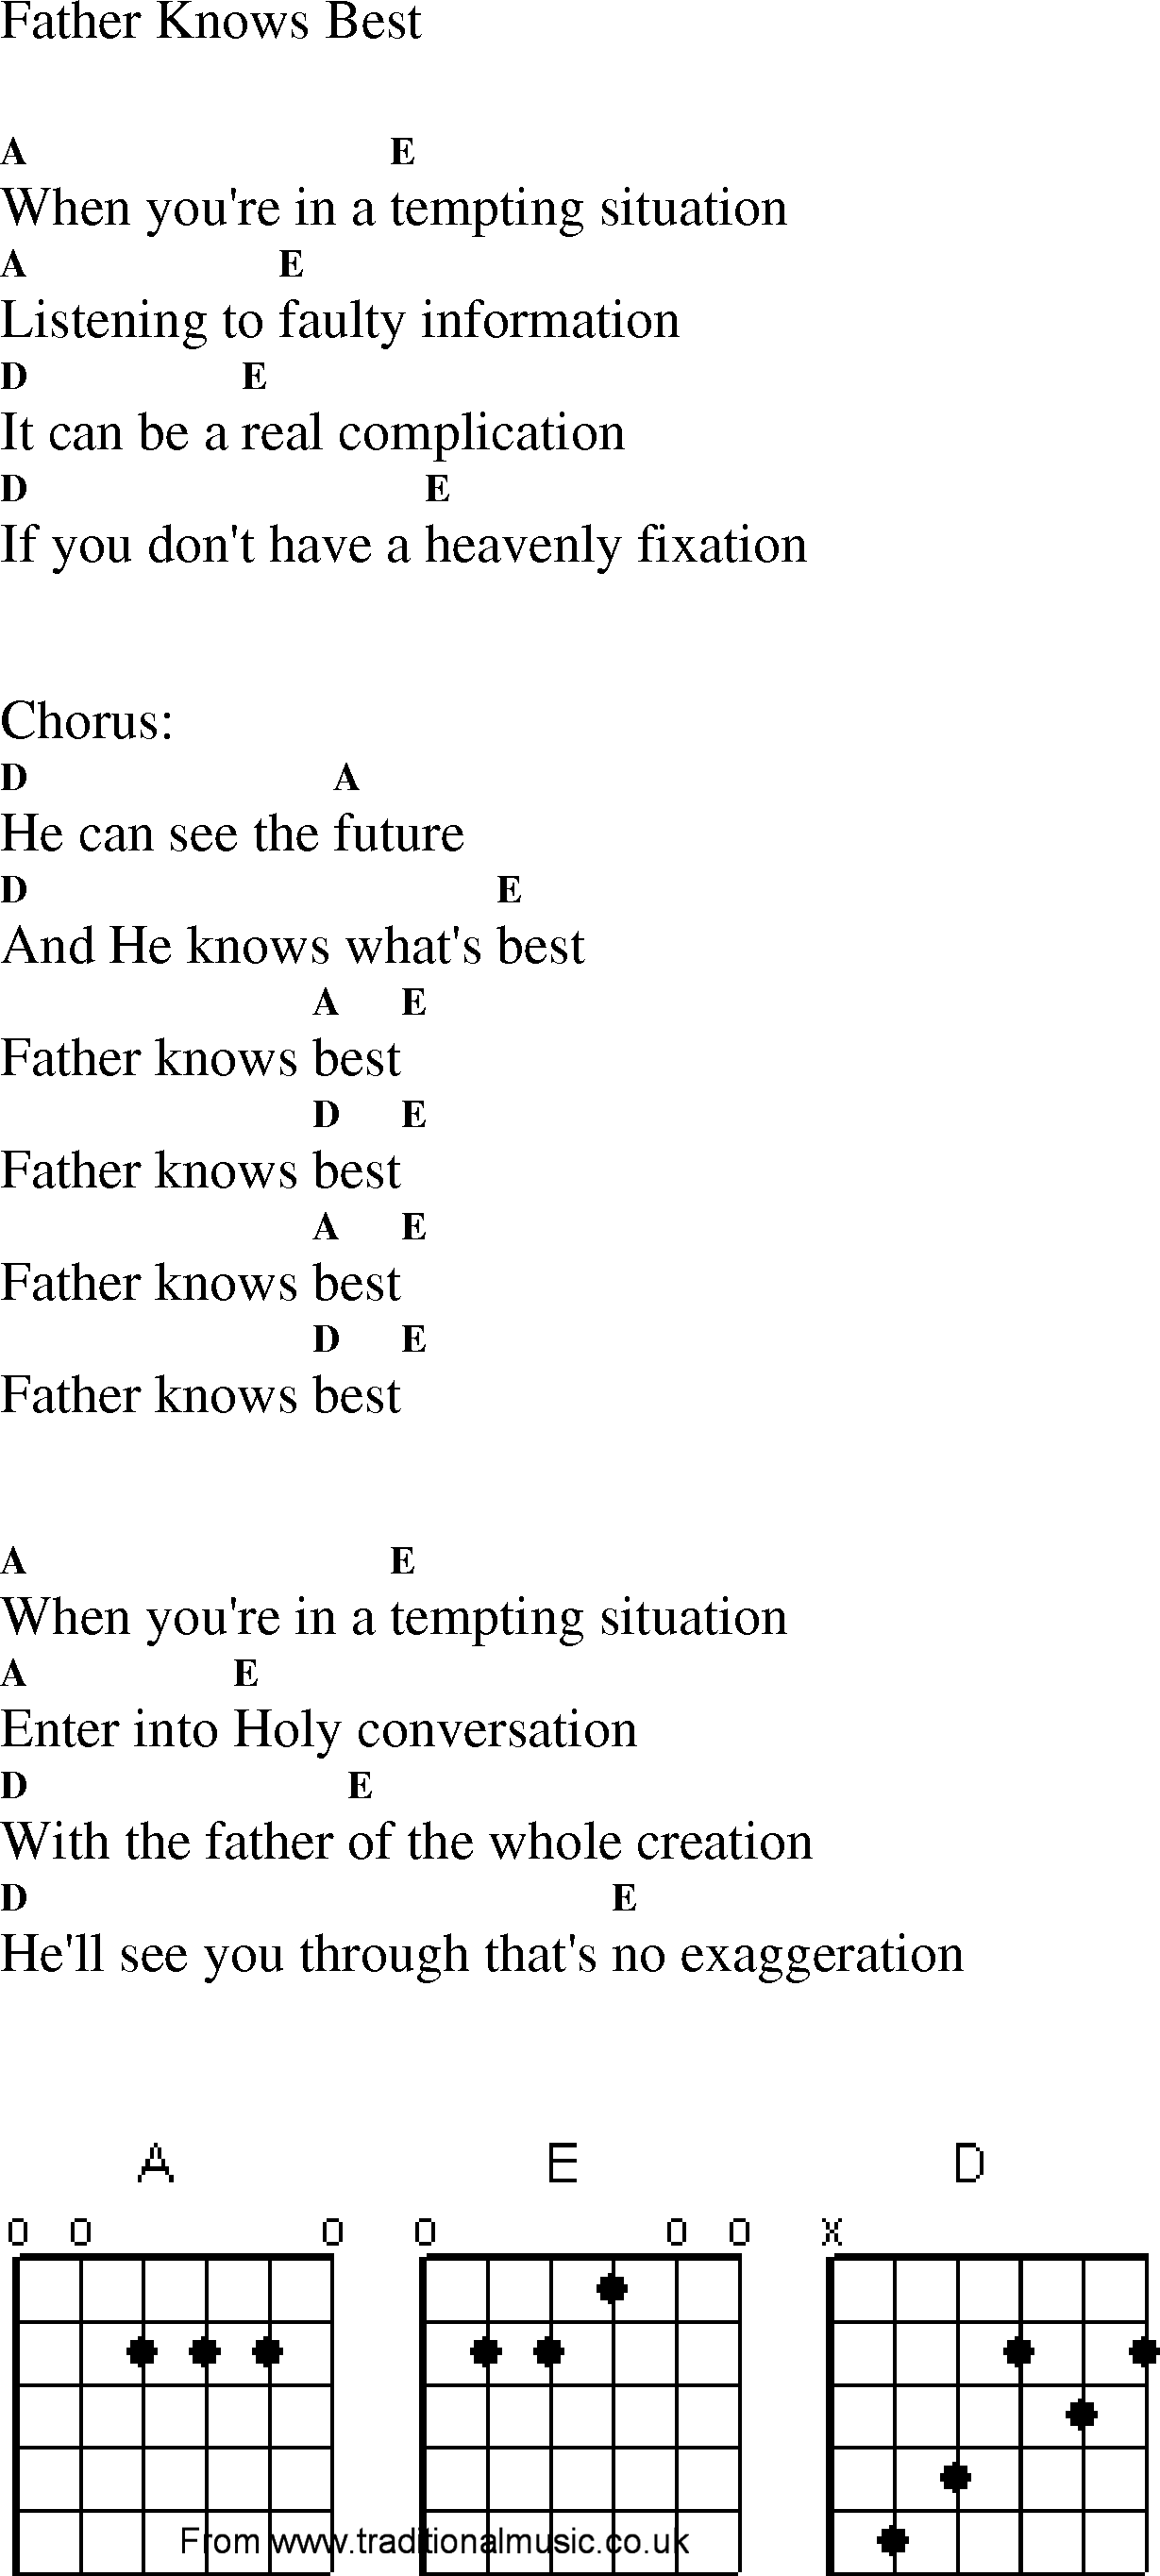 Gospel Song: father_knows_best, lyrics and chords.